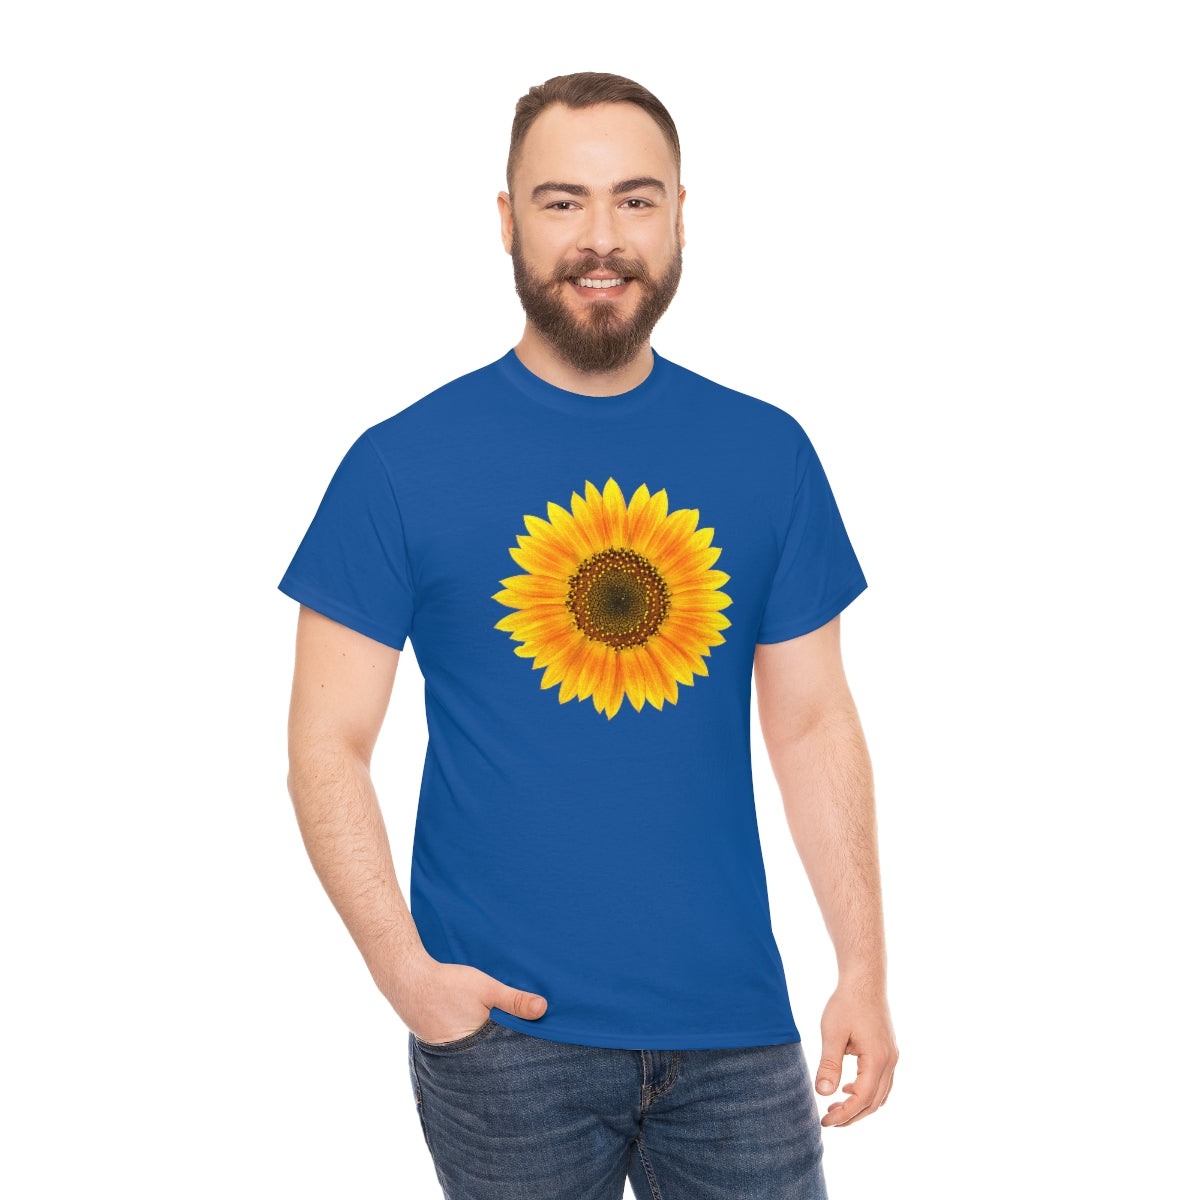 Mock up of a bearded man wearing the Royal Blue T-shirt